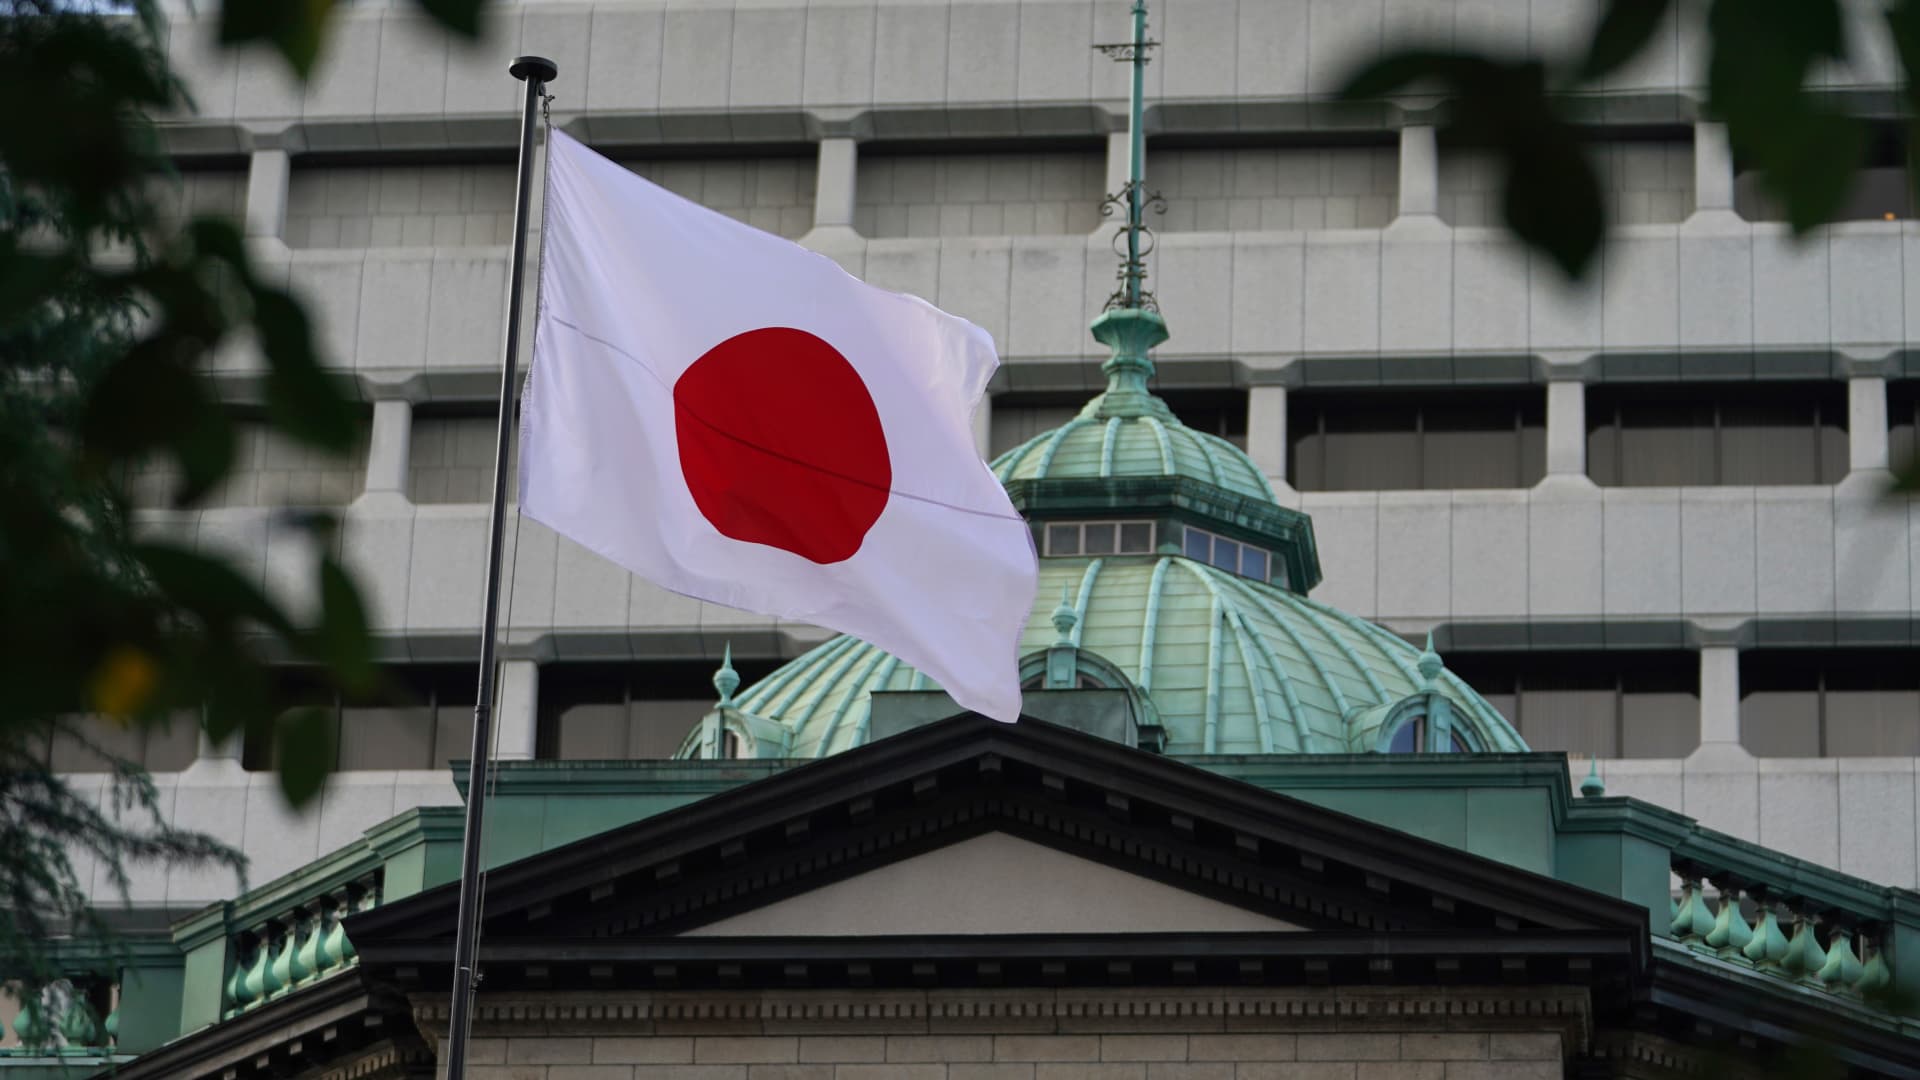 The Bank of Japan may have limited tools to deal with the weak yen, but that's not its focus